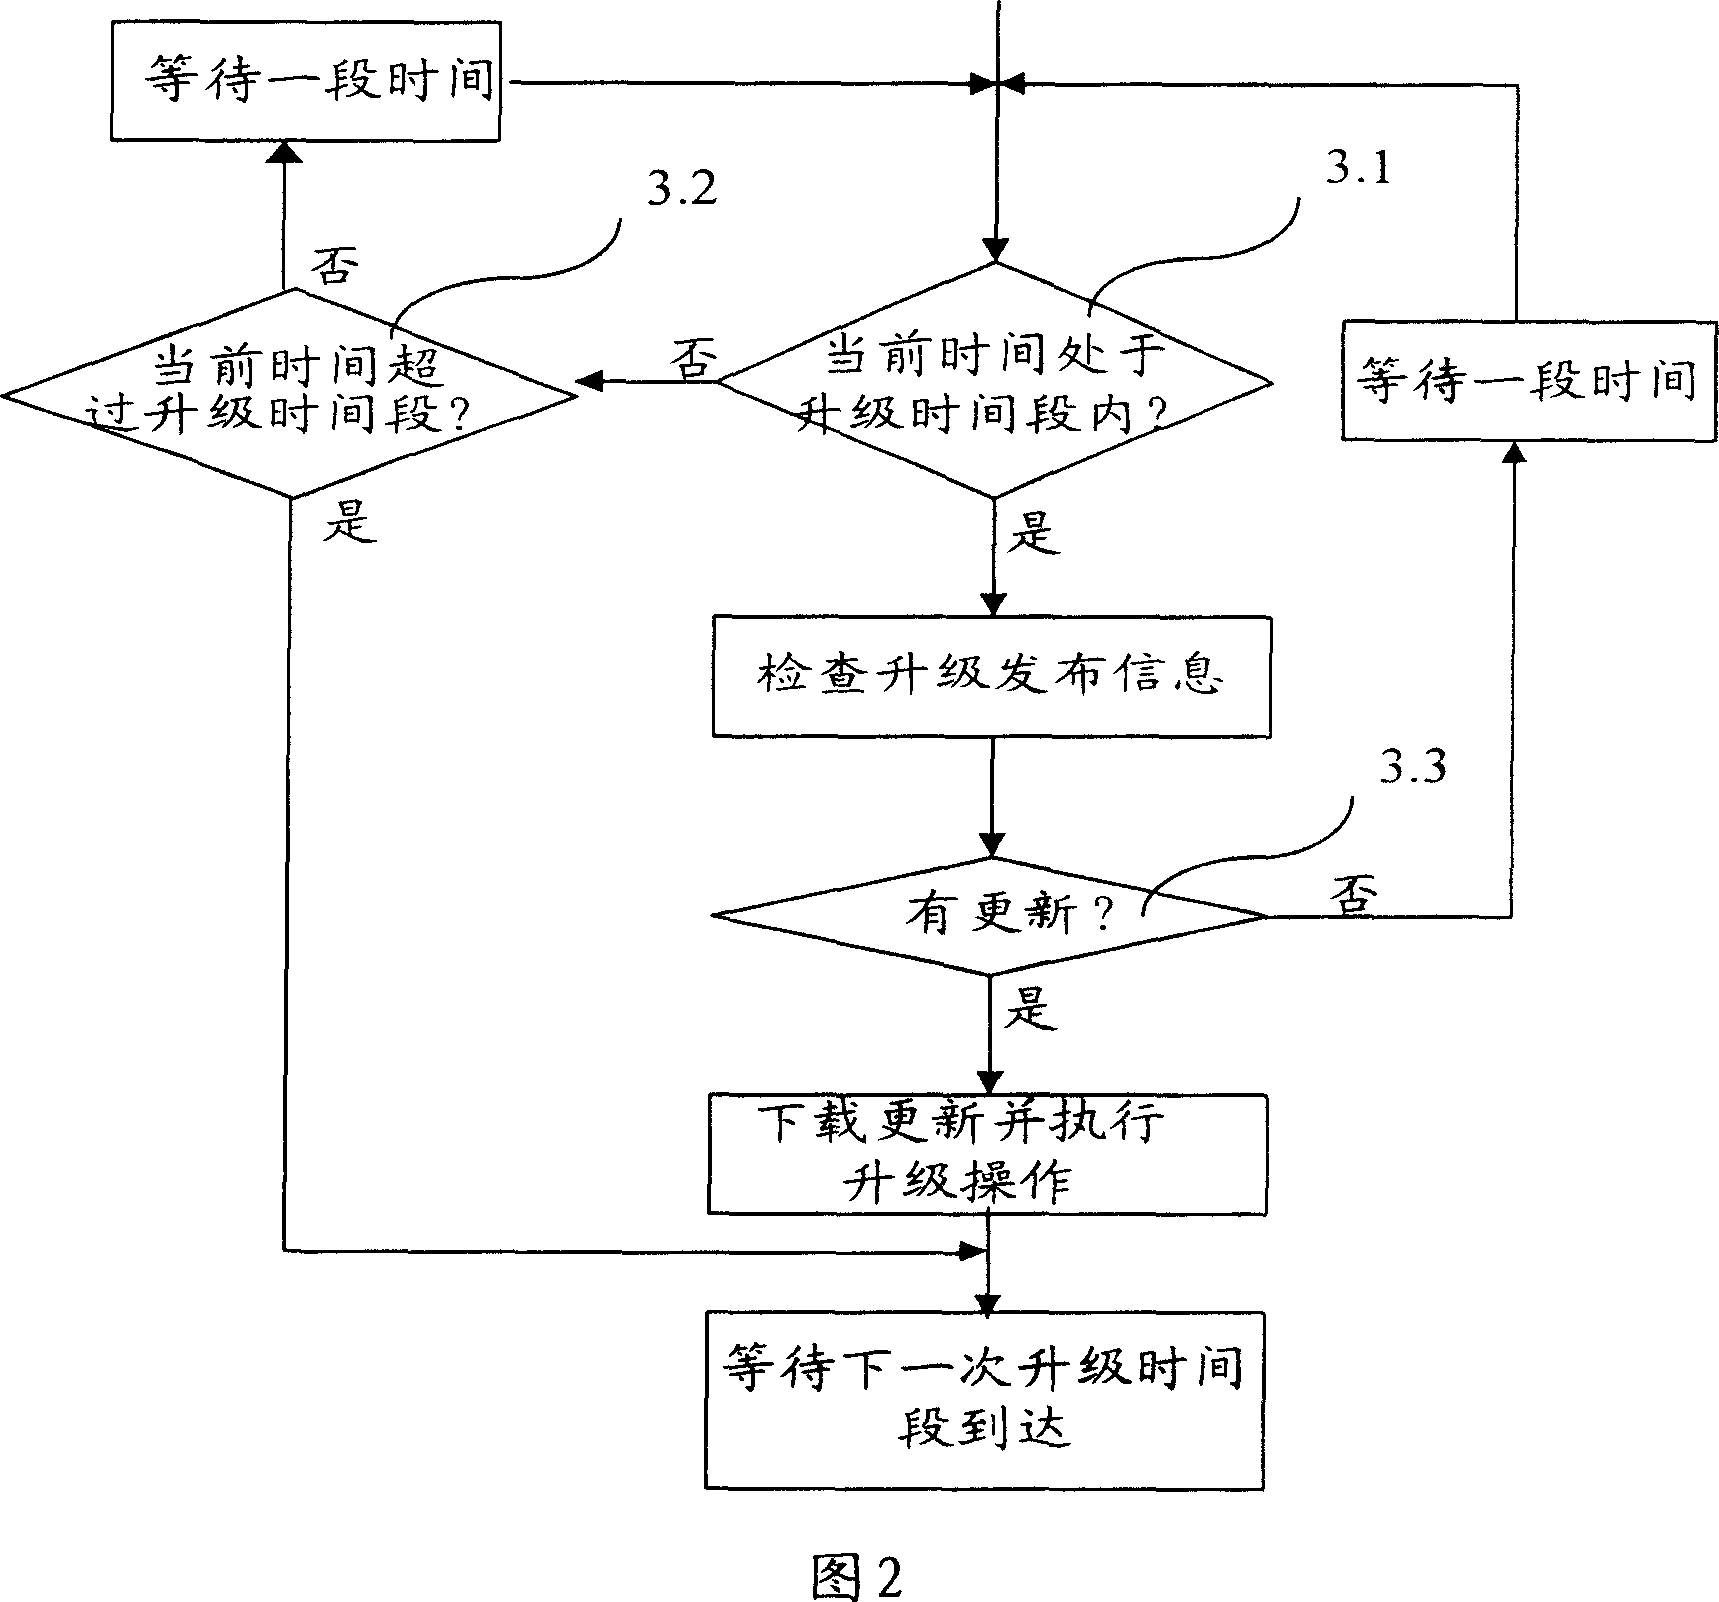 Method and apparatus for automatic selecting staging time